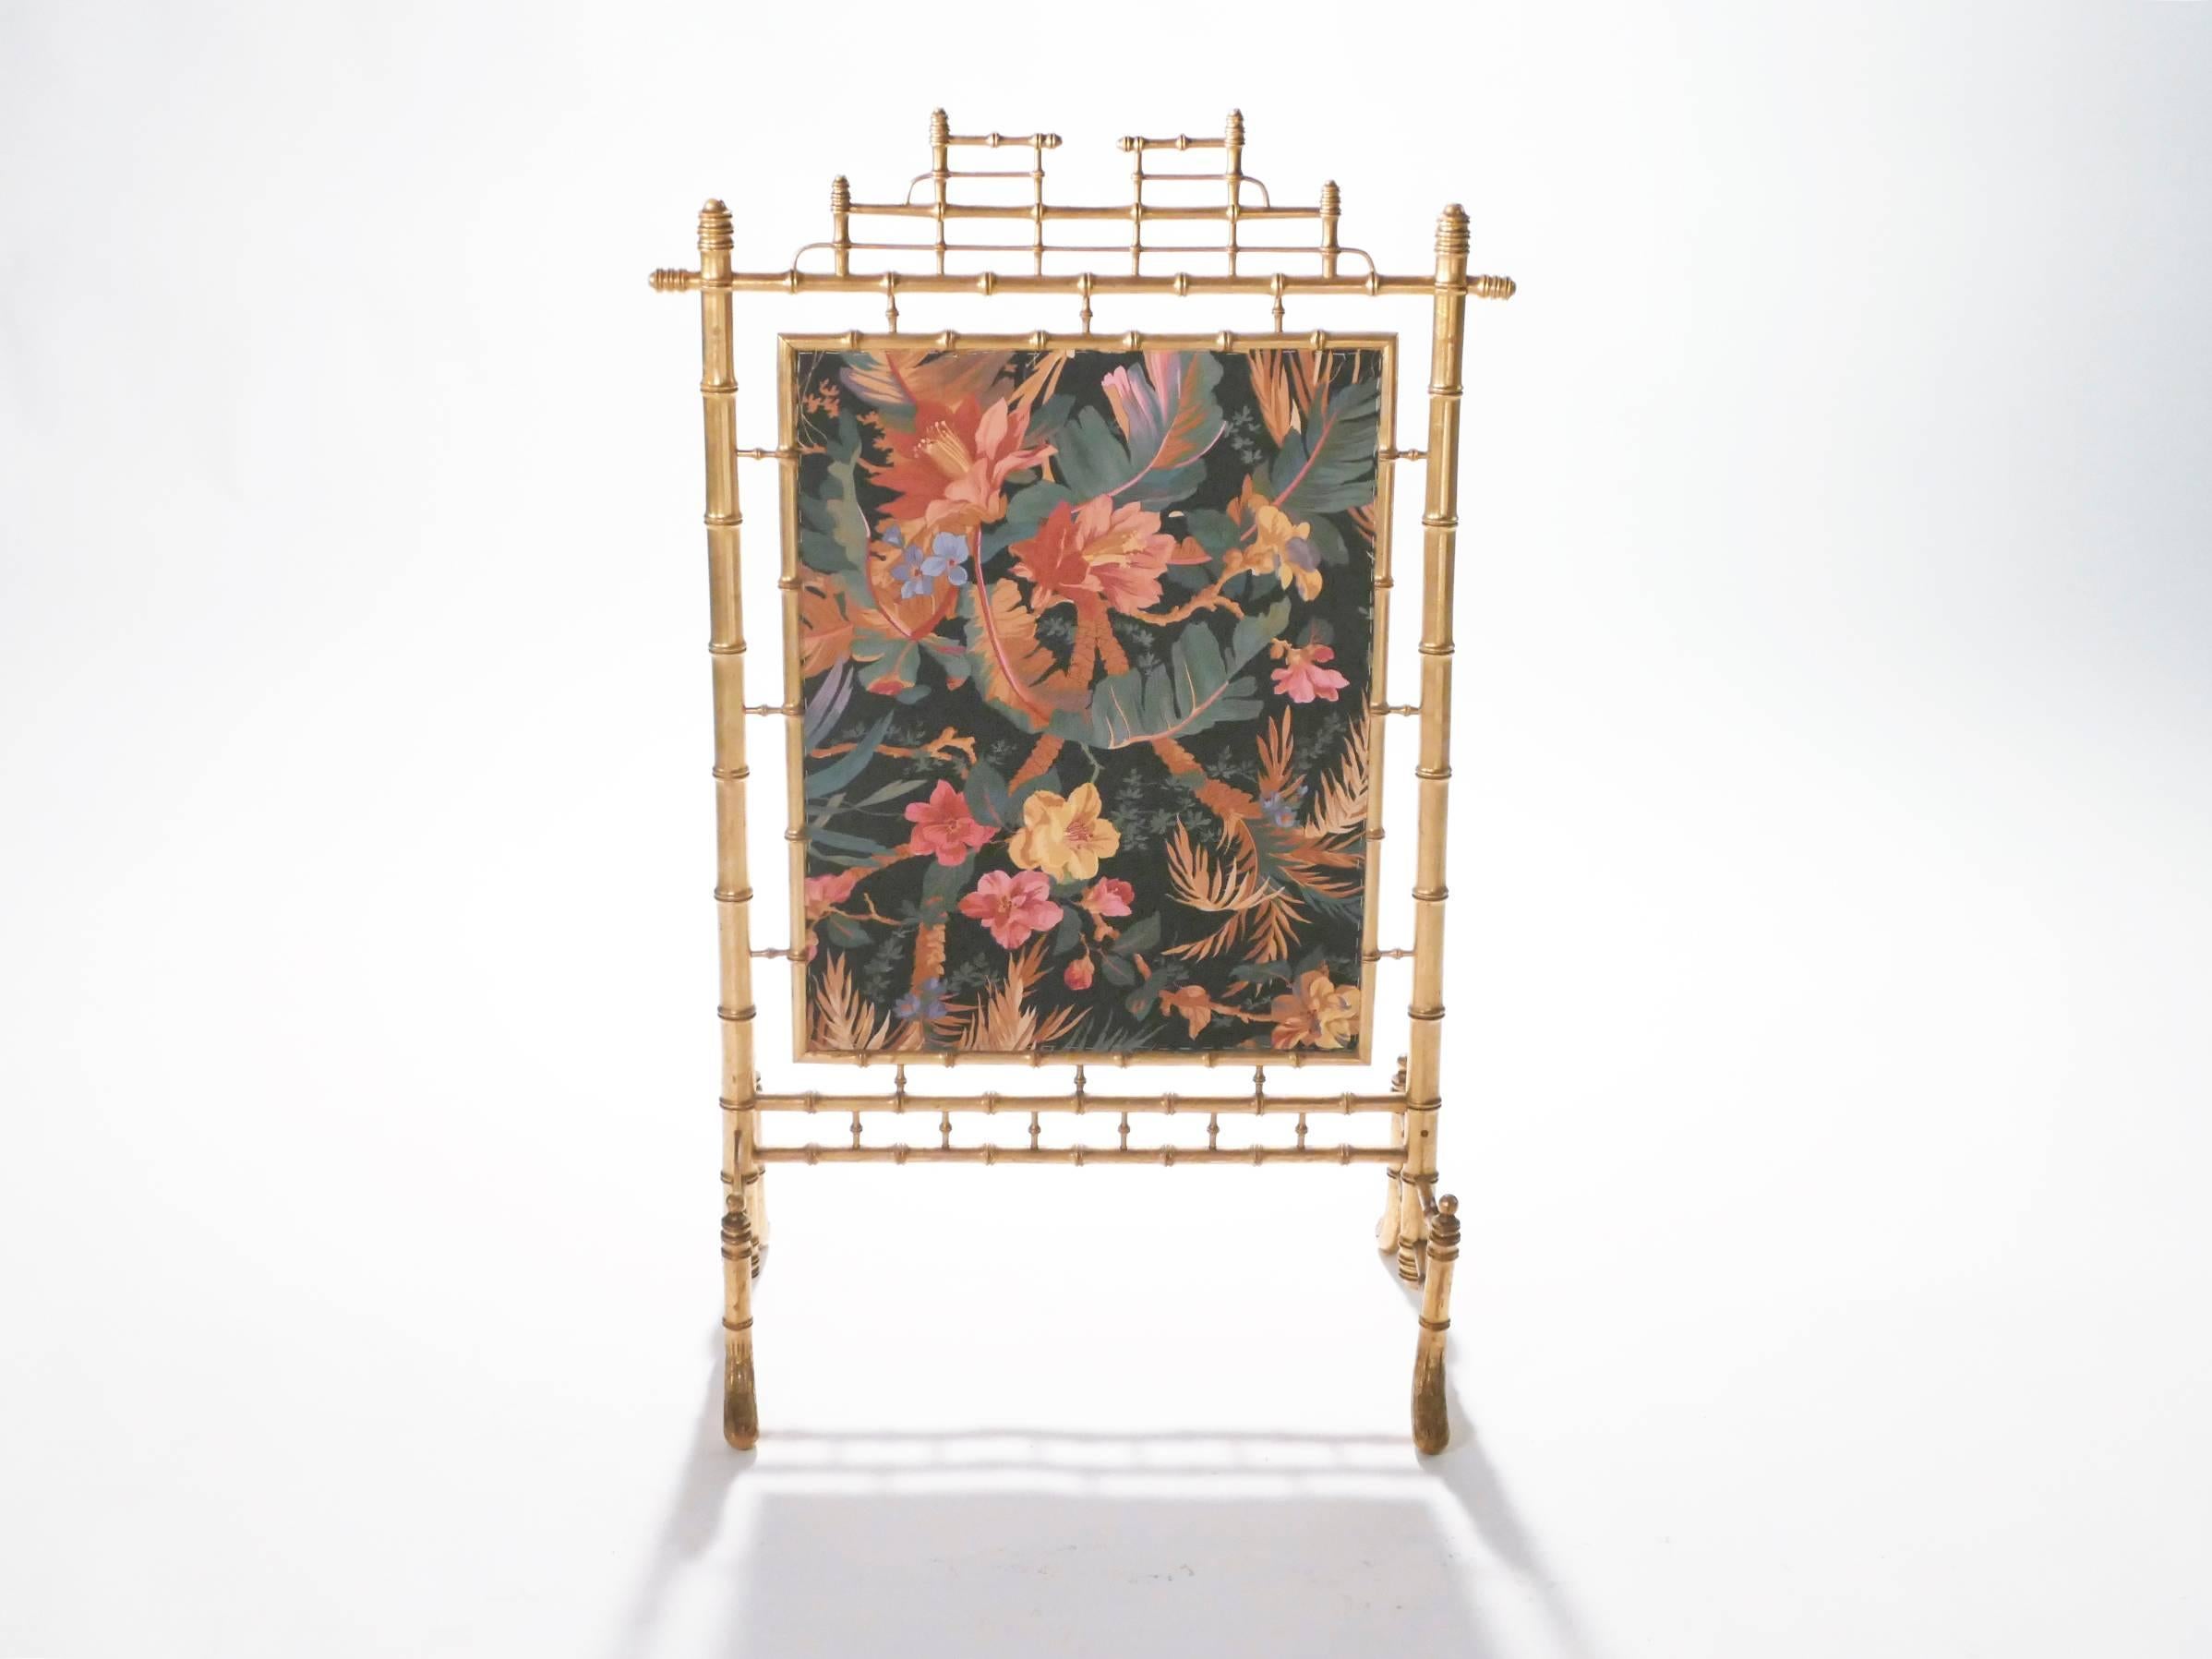 Highly decorative, this pretty, vintage fire screen adds a touch of glam and femininity to a contemporary study, living room, or bedroom. Perspex plastic, chosen for its durability, endurance, and flexibility, is painted to mimic bronze for the